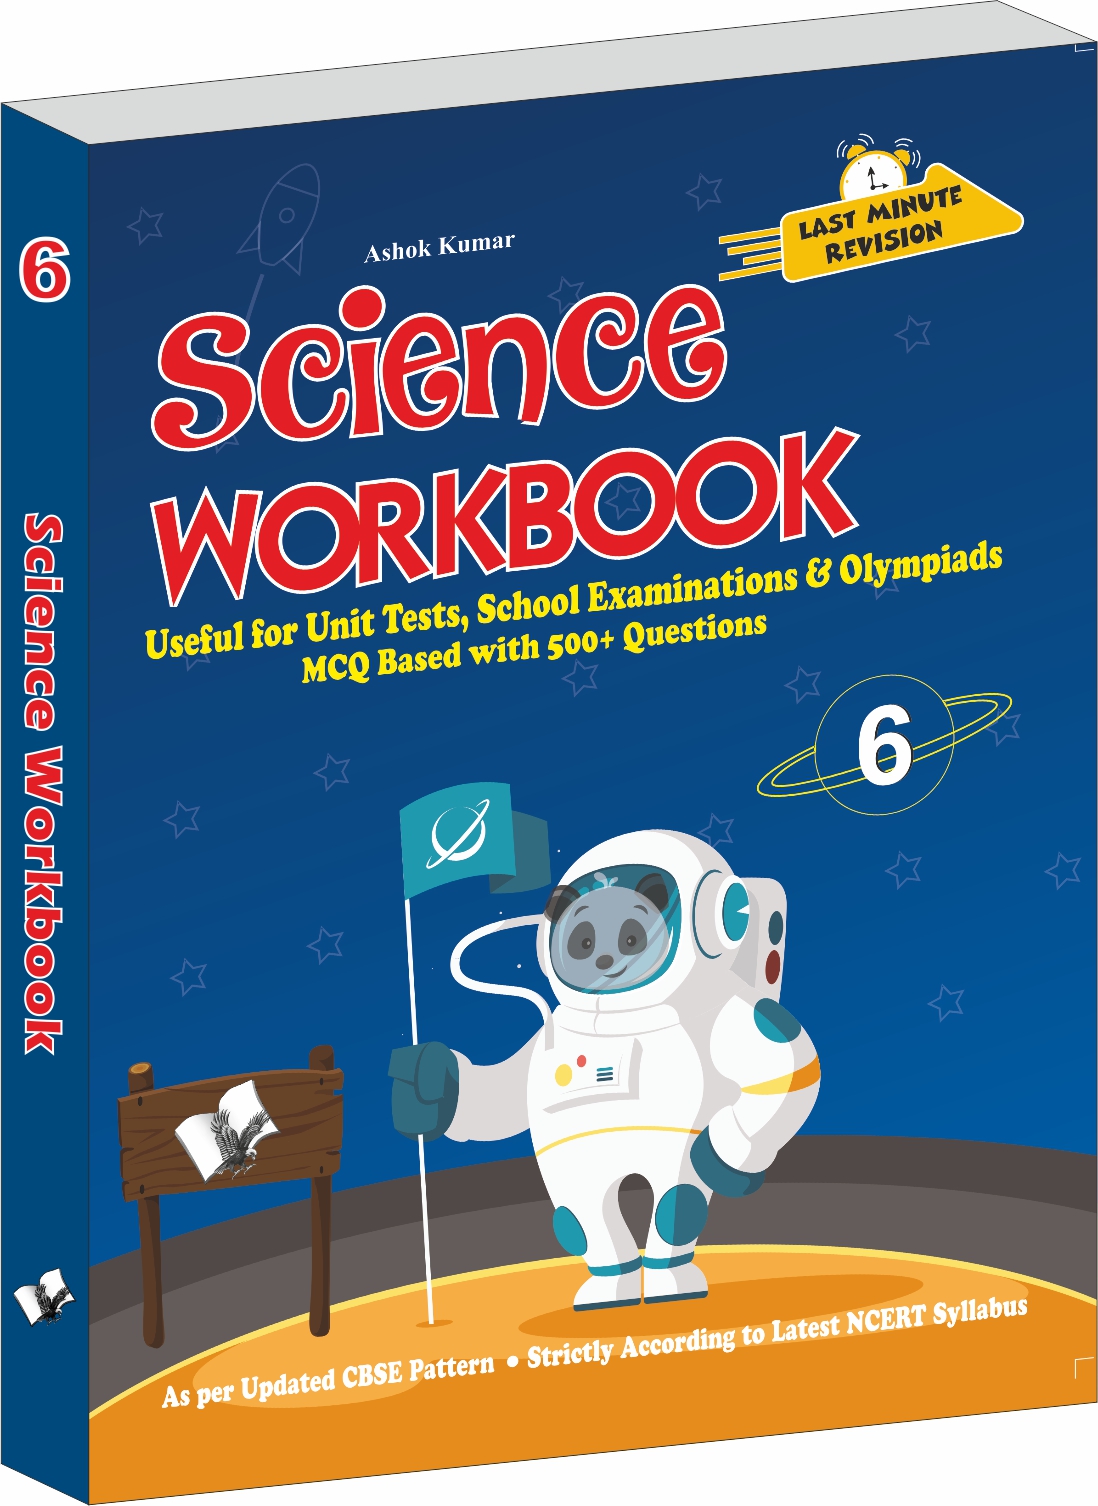 Science Workbook Class 6-Useful for Unit Tests, School Examinations & Olympiads